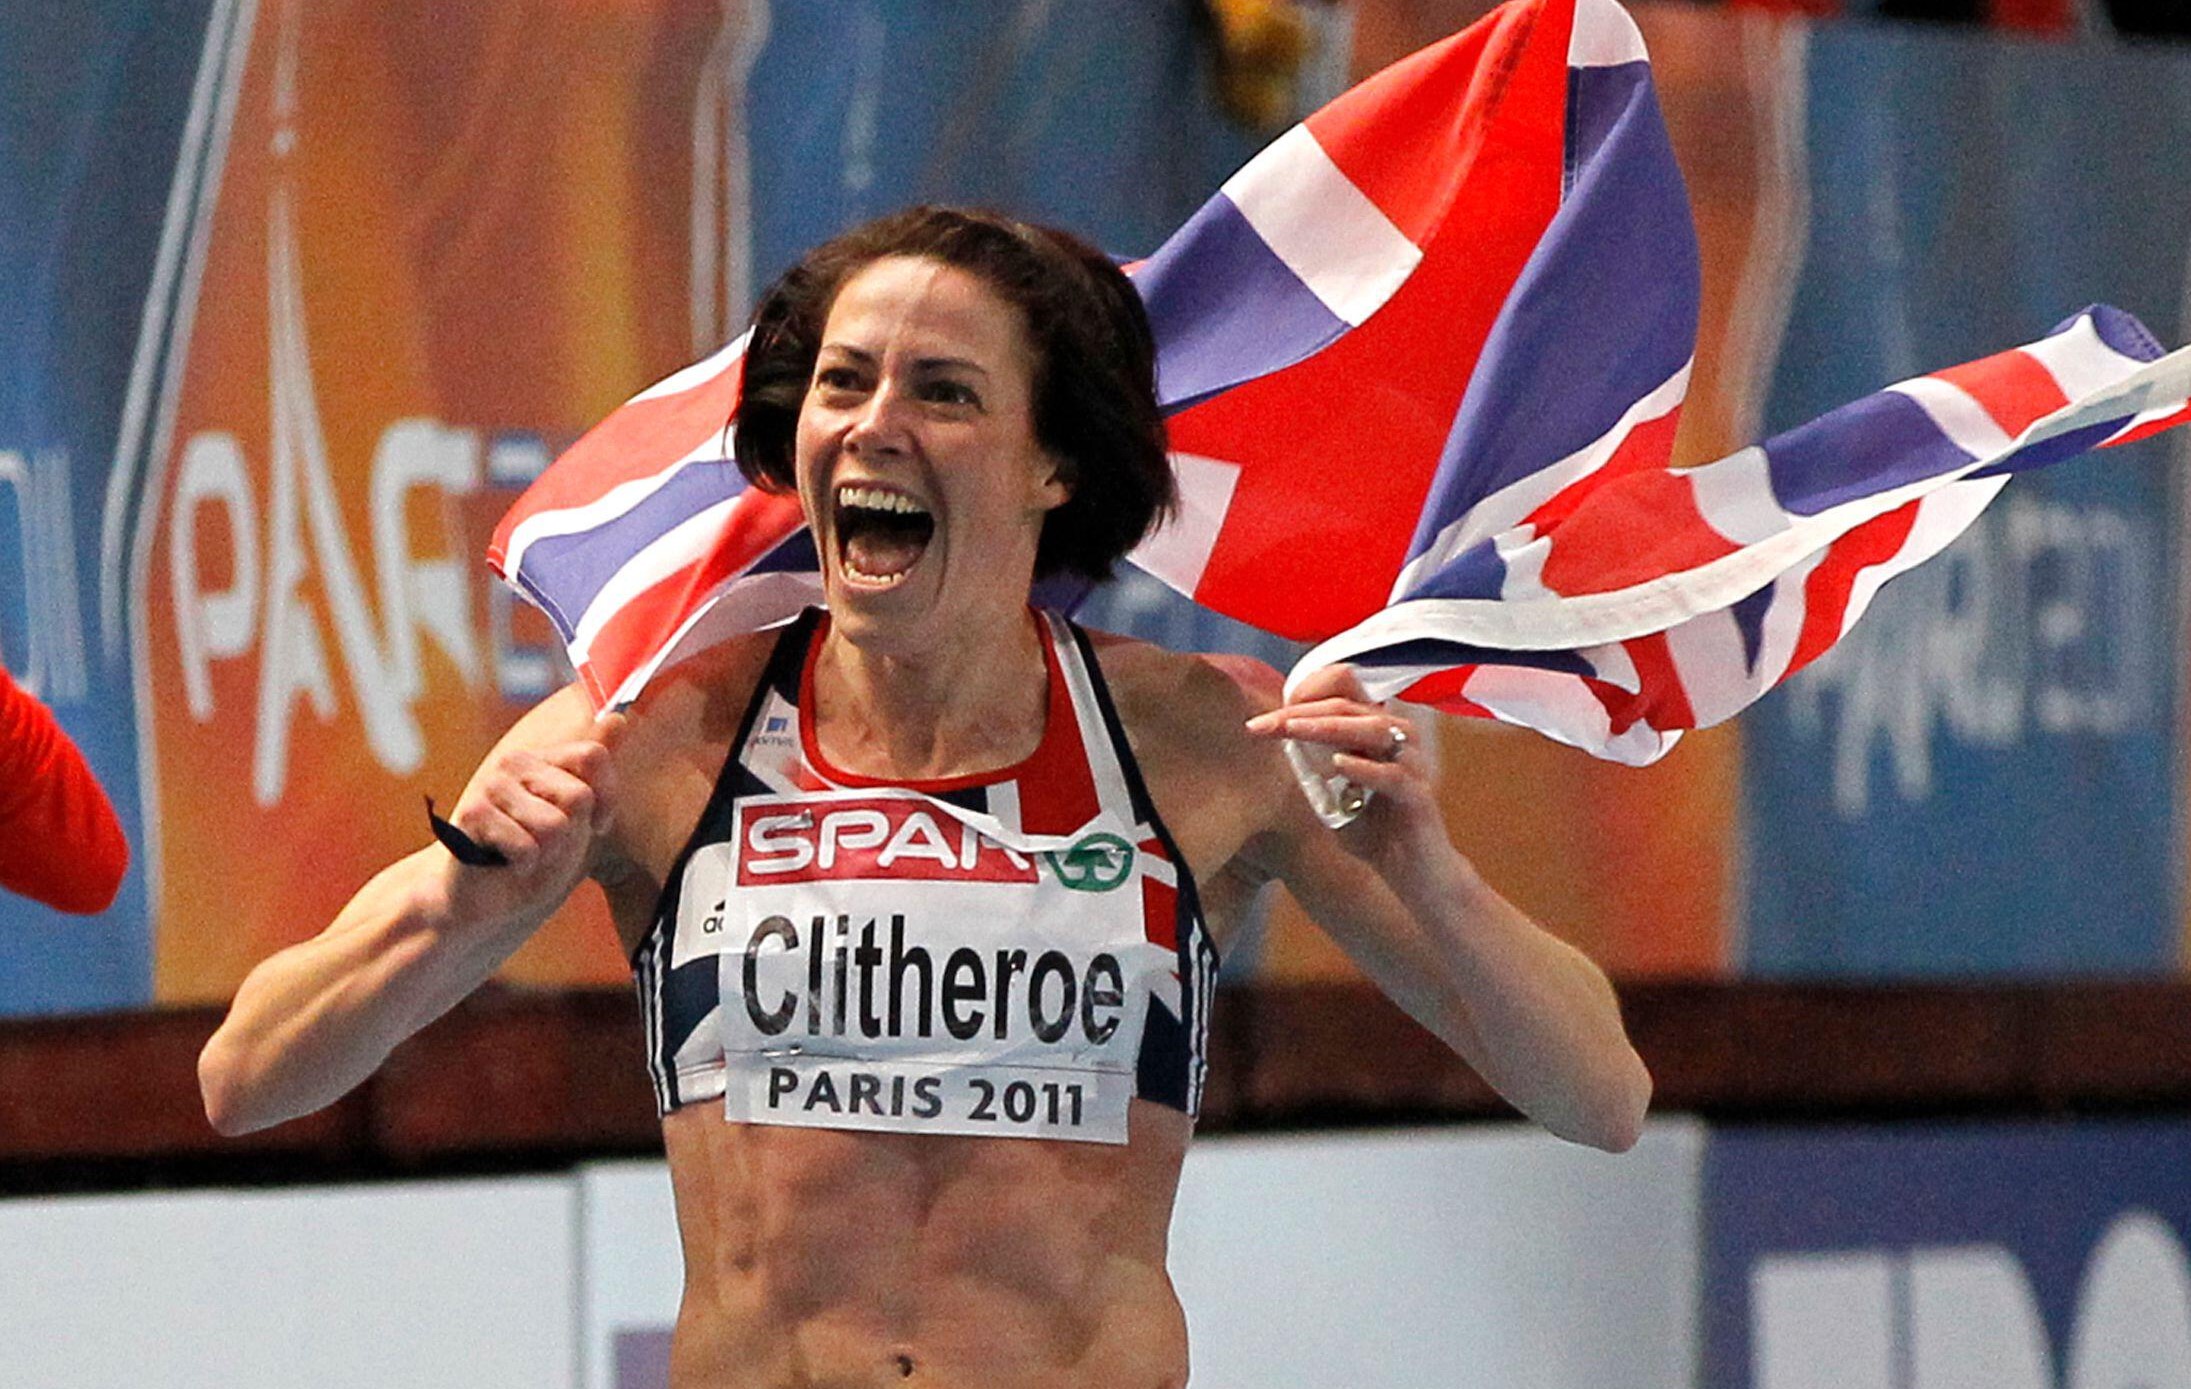 Britain’s Helen Clitheroe celebrates after winning the women’s 3000m final at the European Athletics indoor championships in Paris March 6, 2011. REUTERS/Charles Platiau (FRANCE – Tags: SPORT ATHLETICS)